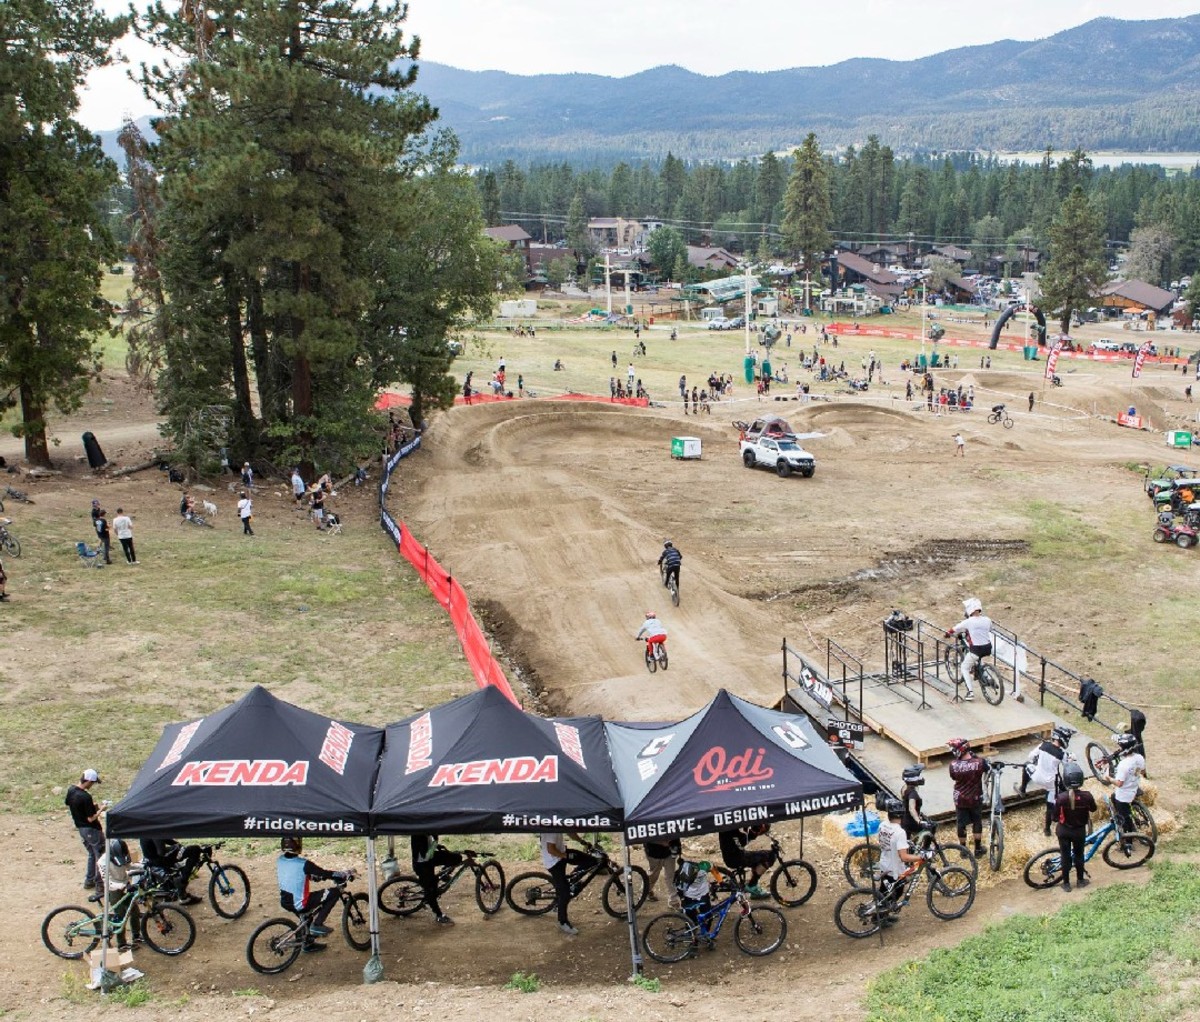 A view from above of the 2nd Annual Strait Acres Dual Slalom Invitational went off at Snow Summit Resort in Big Bear Lake, California.